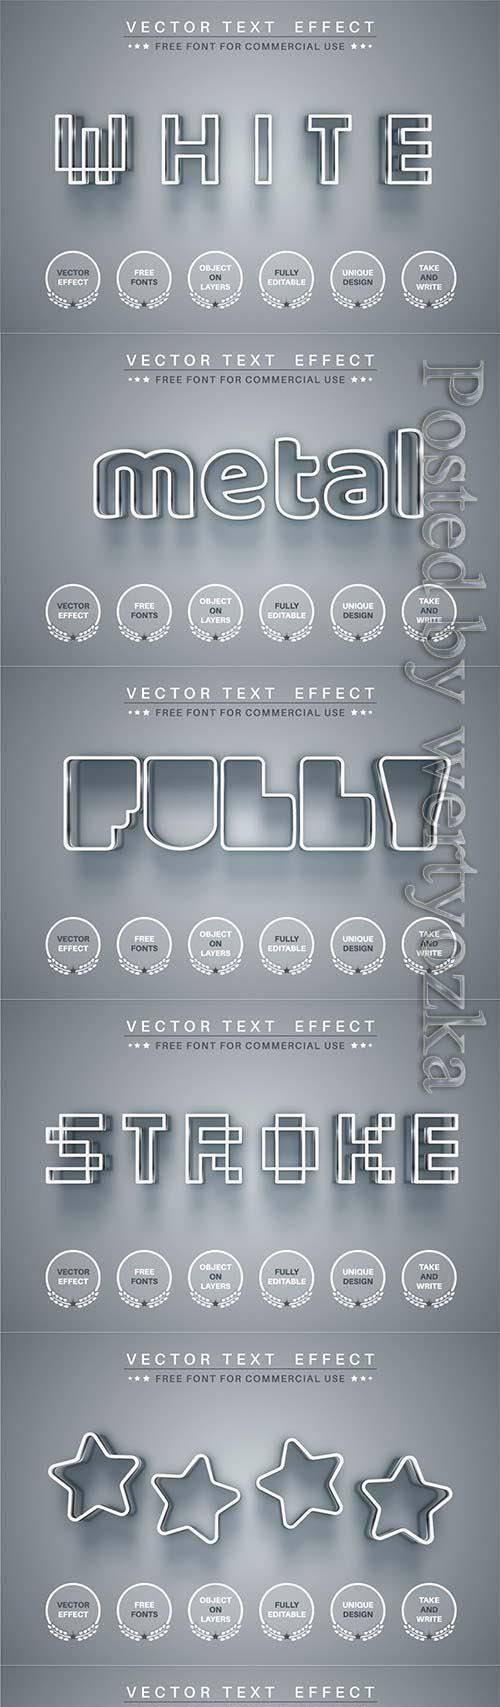 White pixel - editable text effect, font style